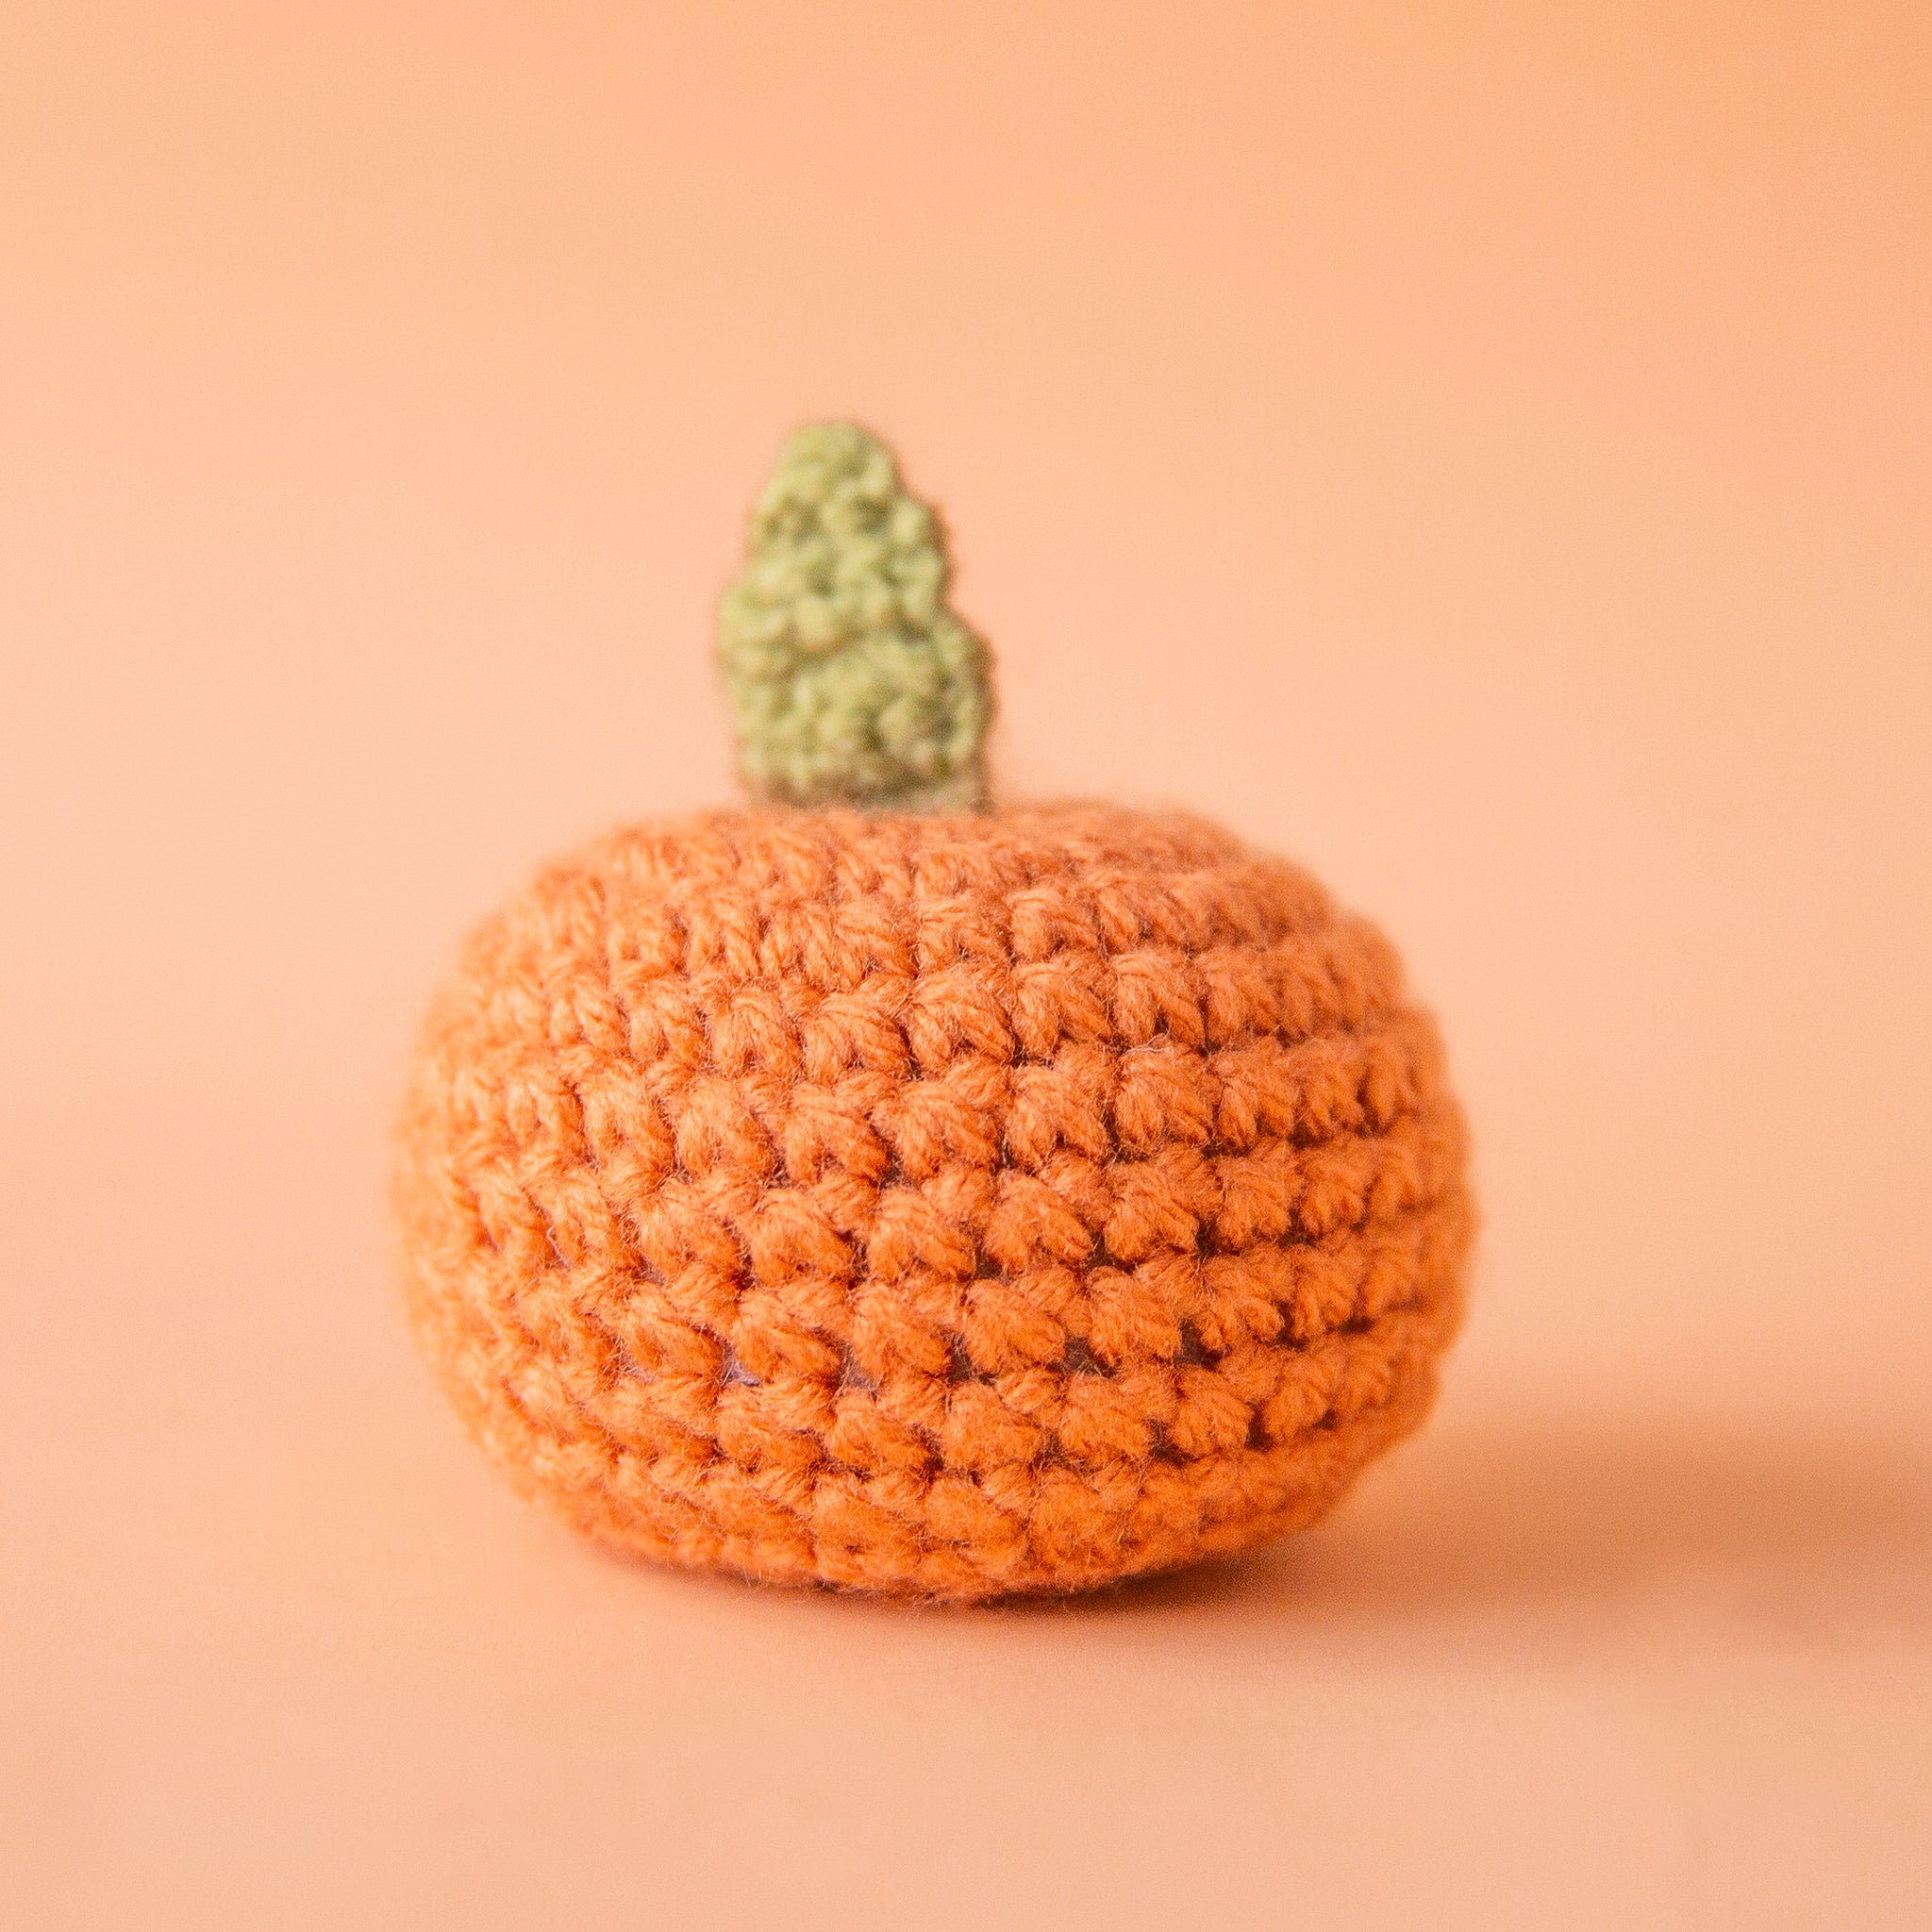 On a peachy background is a knitted orange shaped toy. 